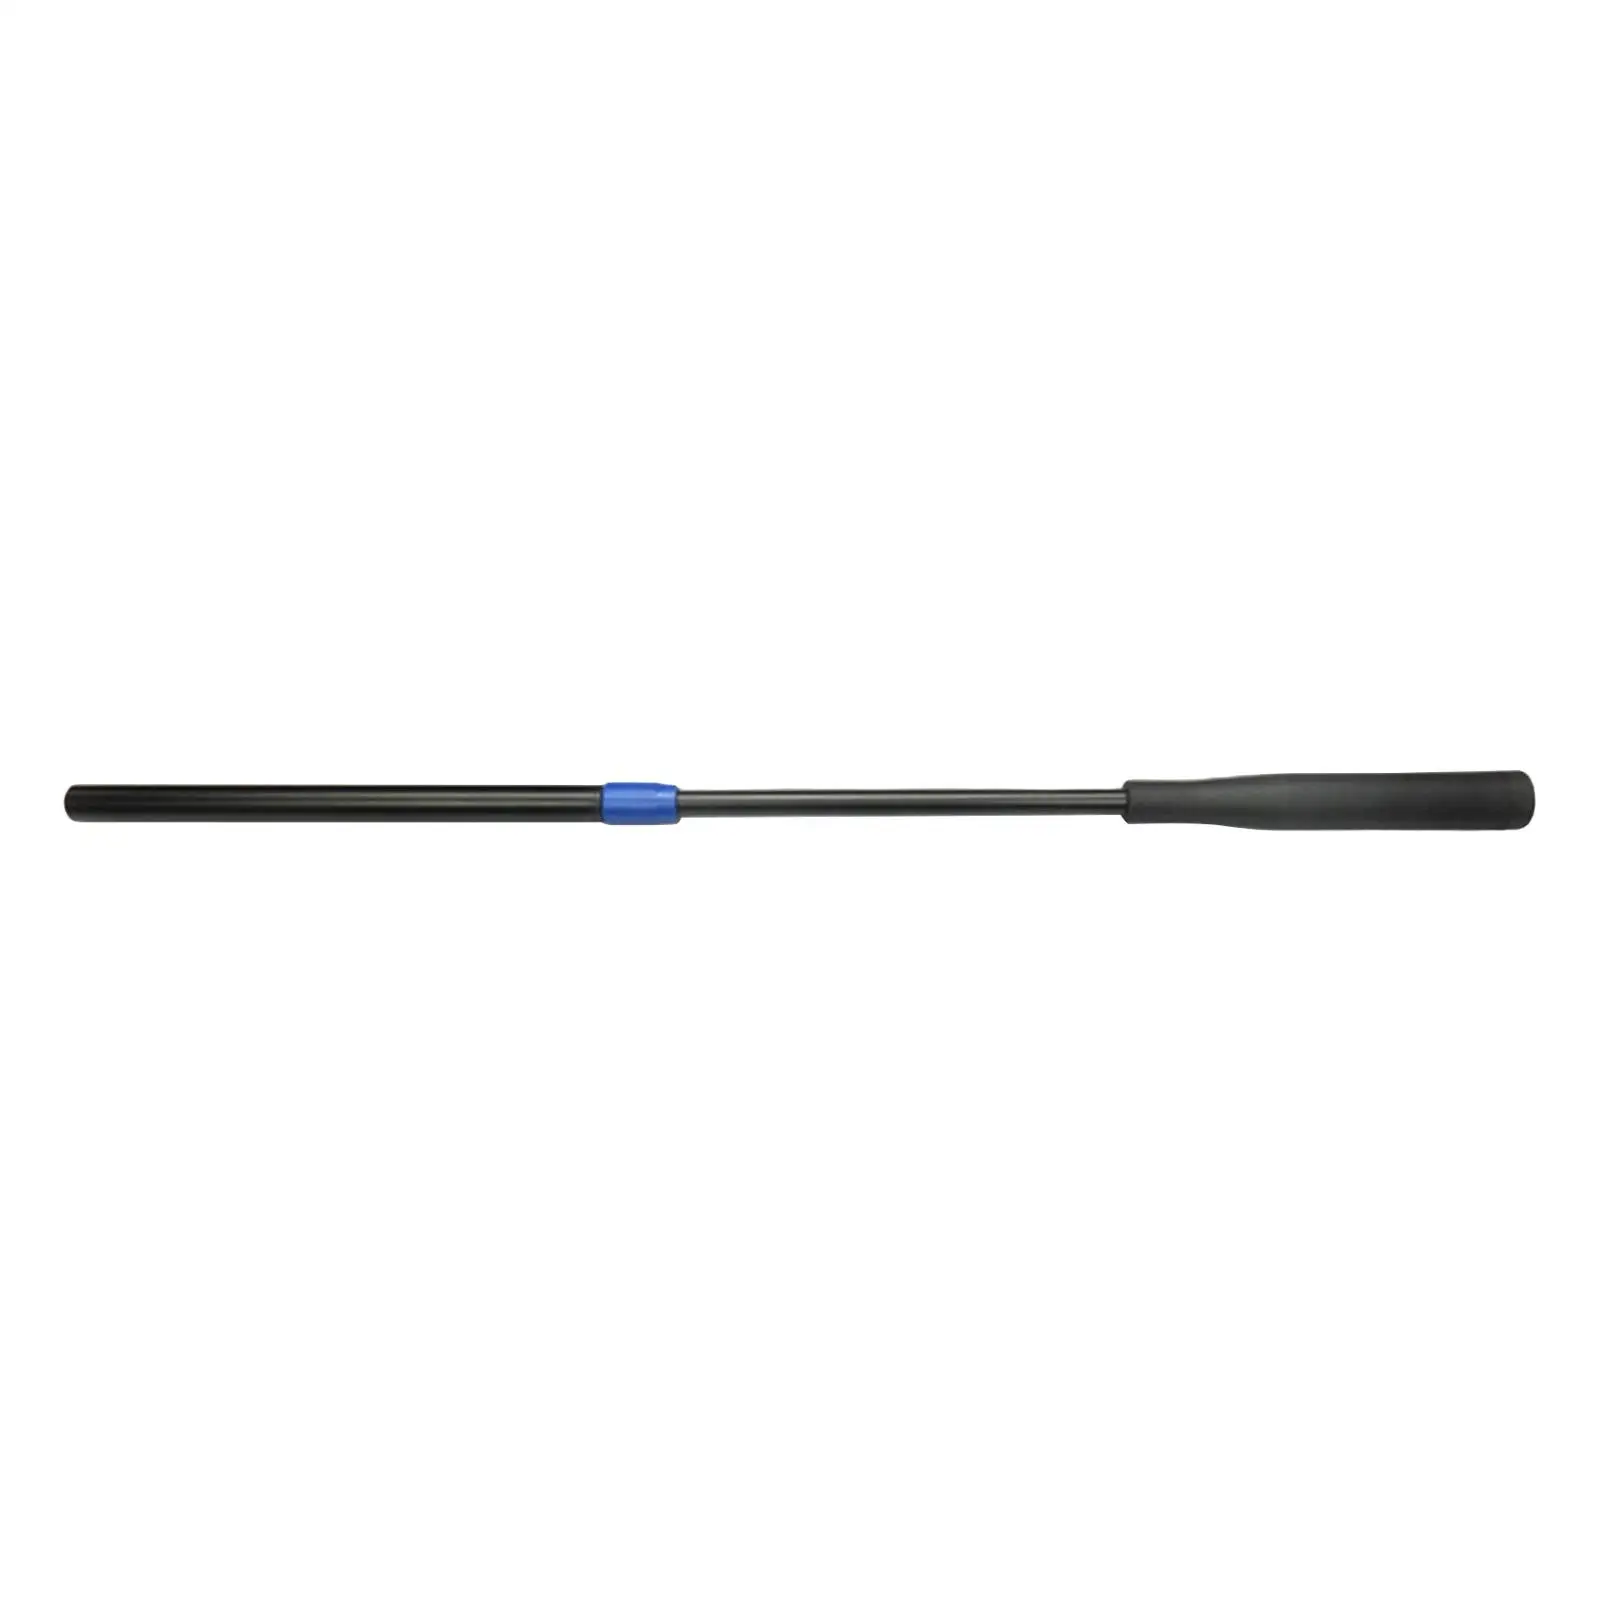 9 Balls Telescopic Pool Cue Butt End Extension Extreme Extender Lengthener for Pool Billiard Cues Sticks Accessories